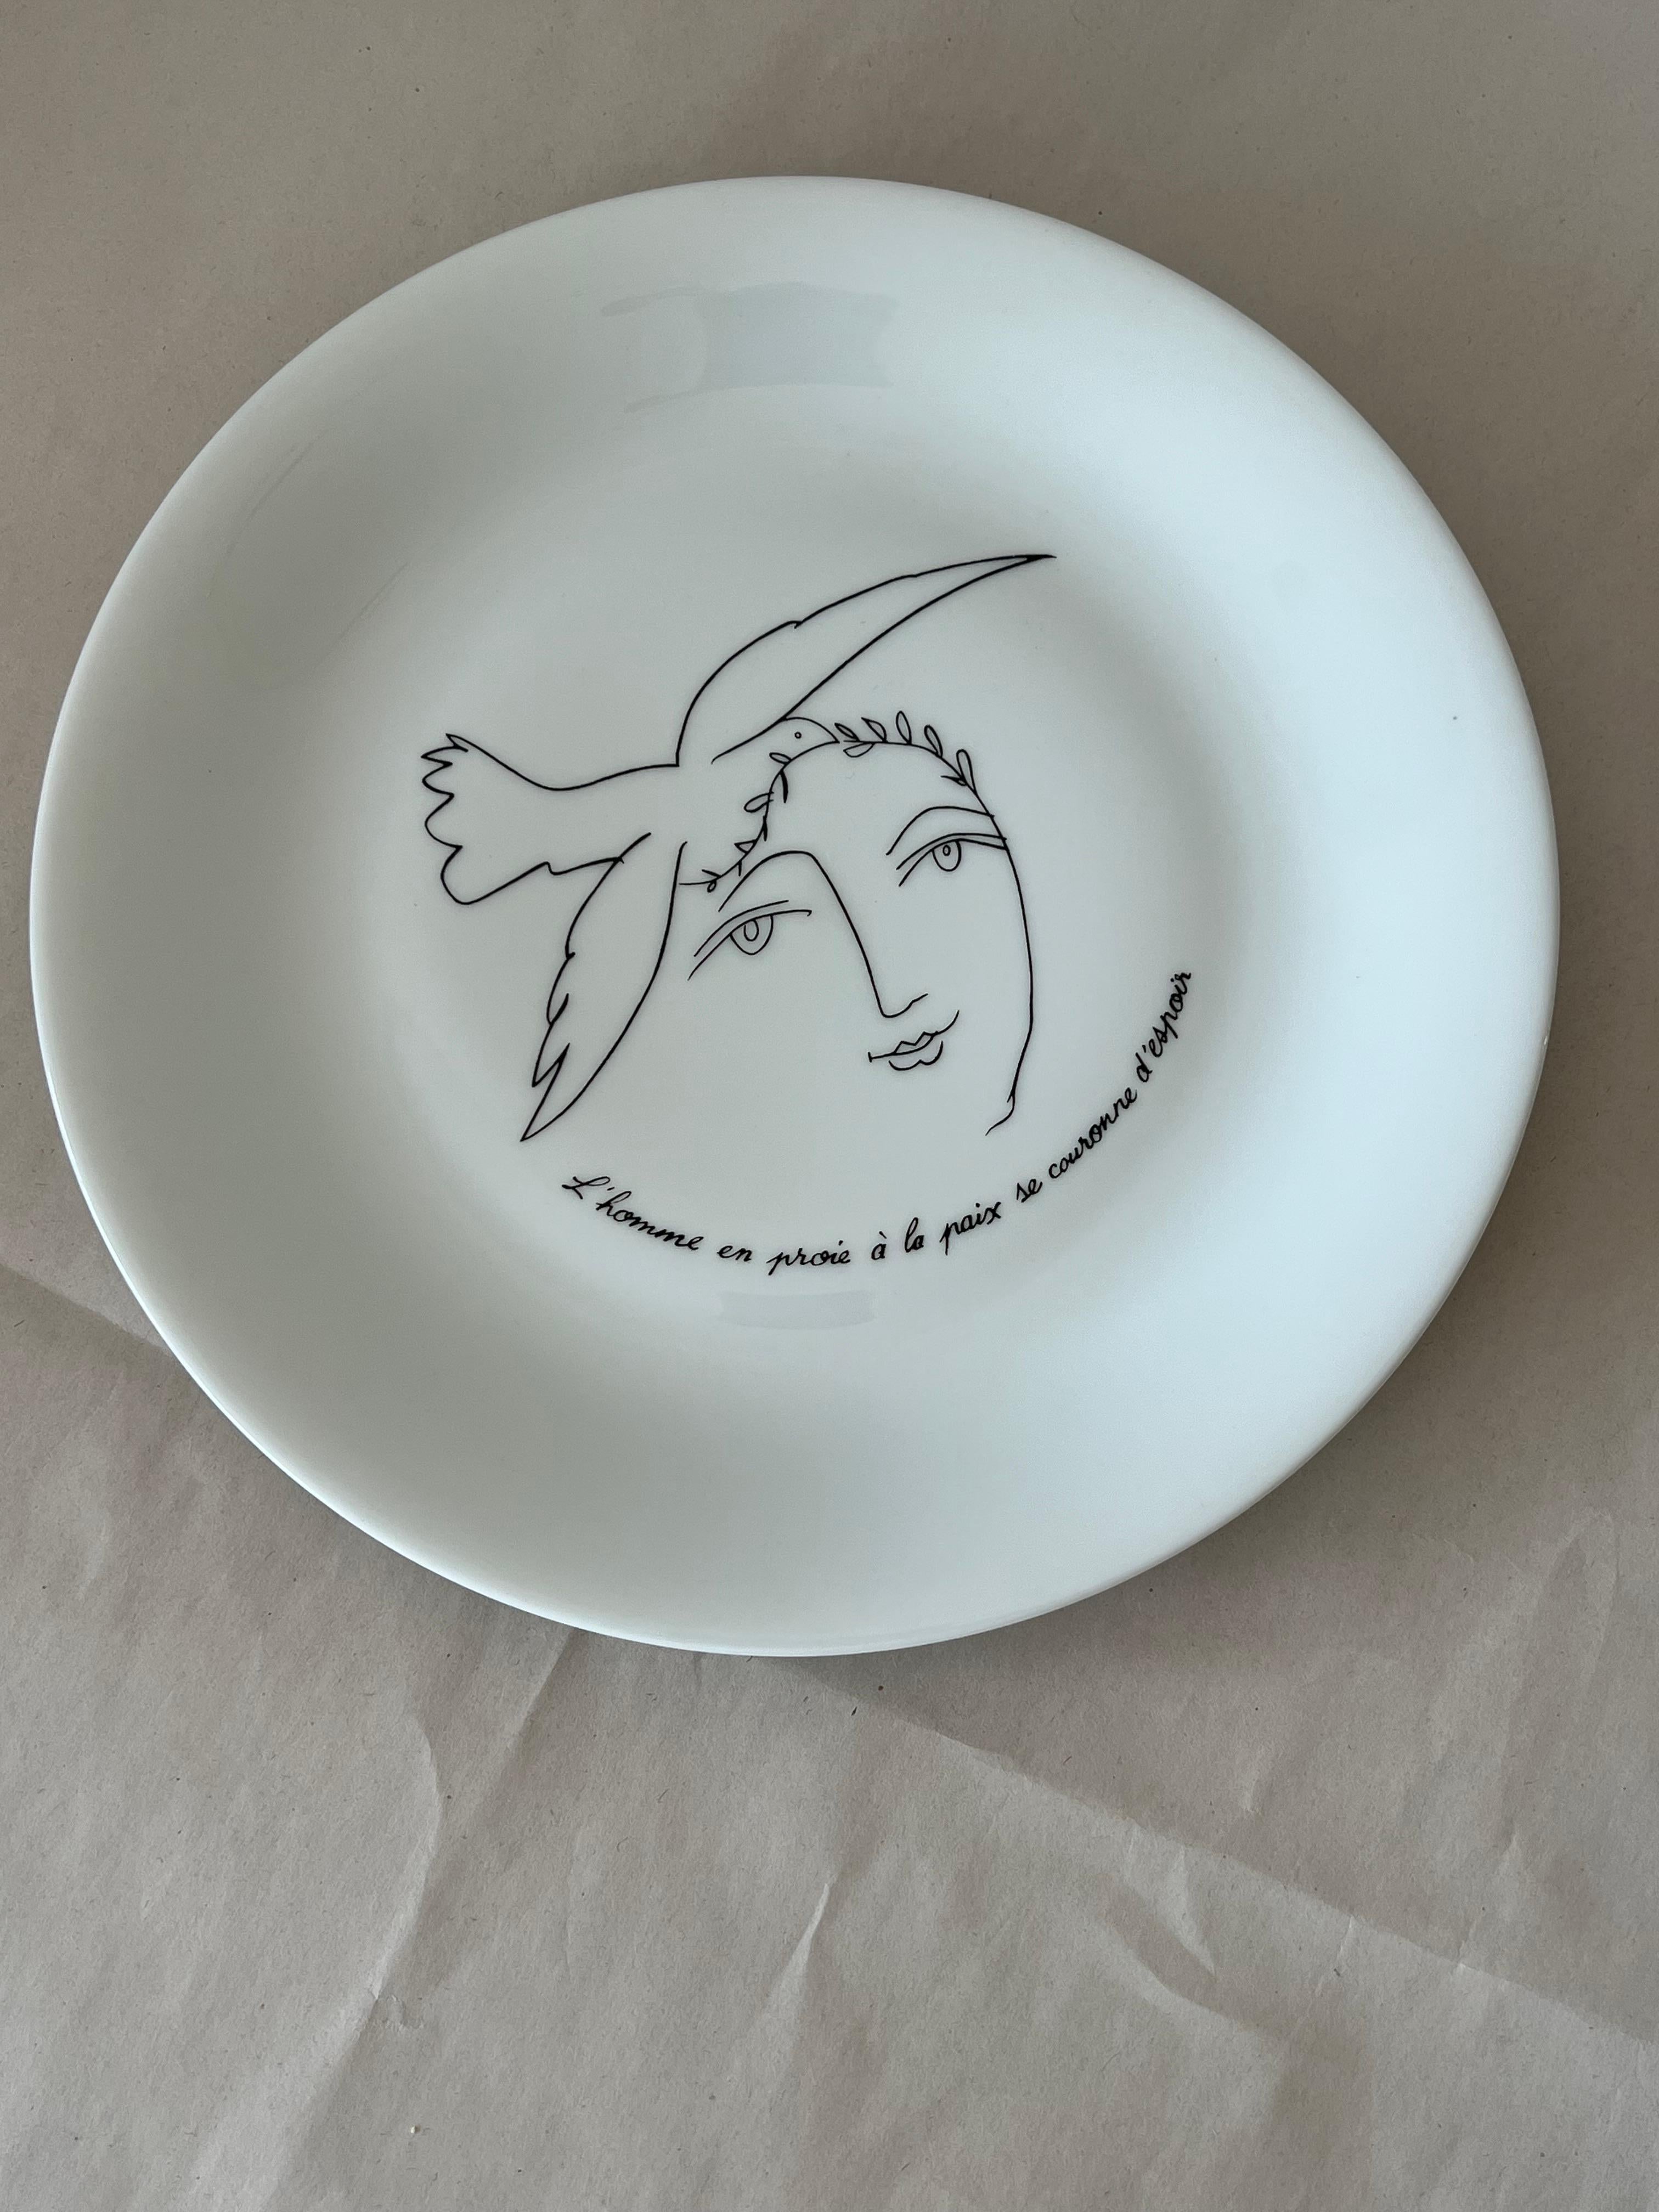 Beautiful decorative, ceramic plate/charger by Pablo Picasso/Paul Eluard, produced by Limoges, France. 